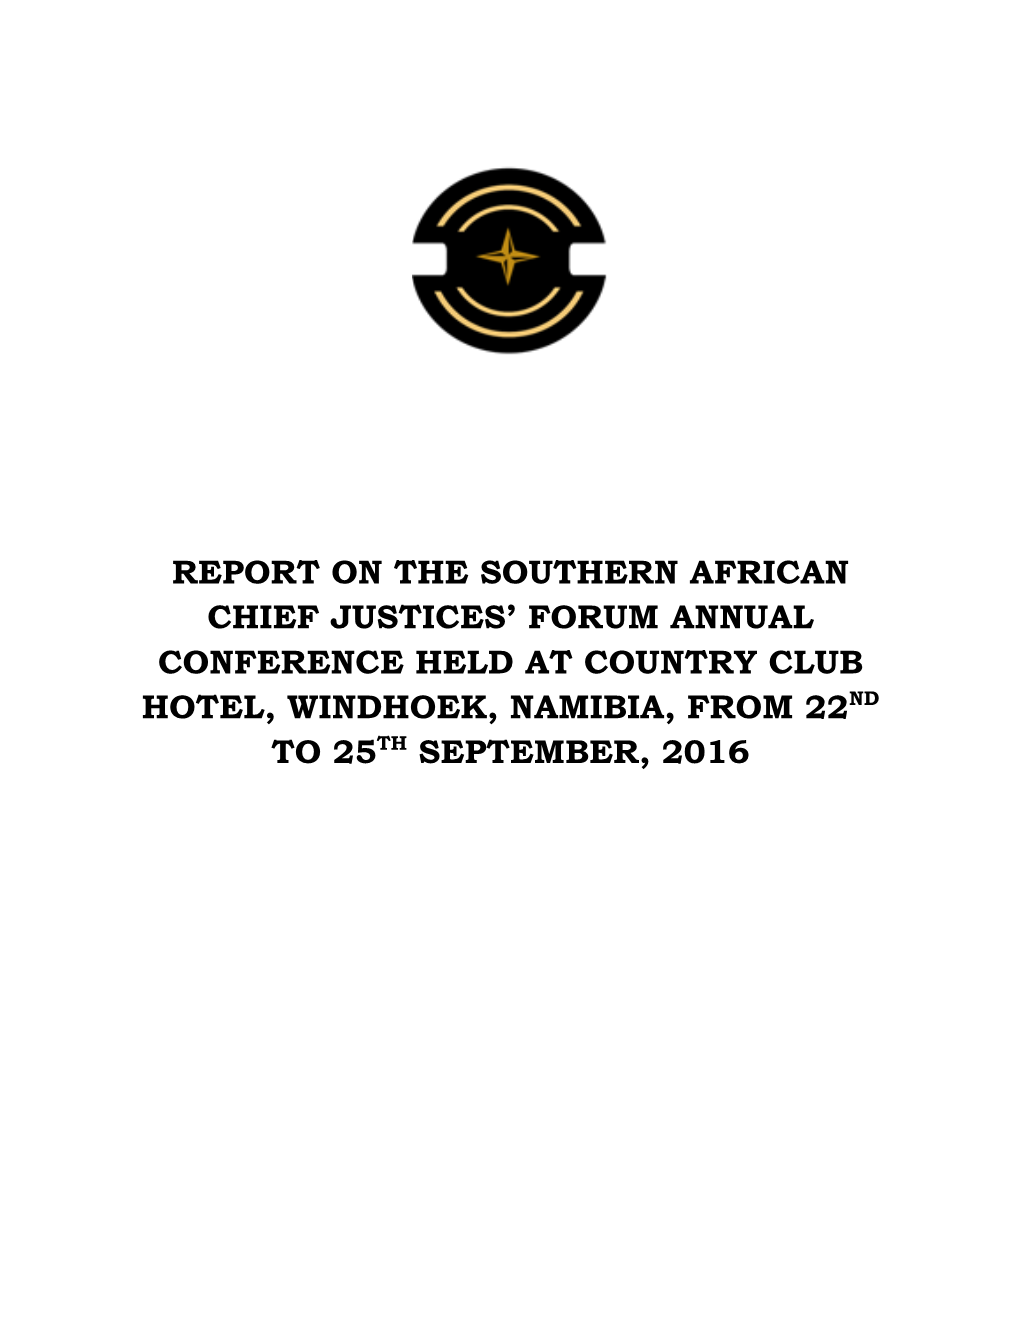 Report on the Southern African Chief Justices’ Forum Annual Conference Held at Country Club Hotel, Windhoek, Namibia, from 22Nd Th to 25 September, 2016